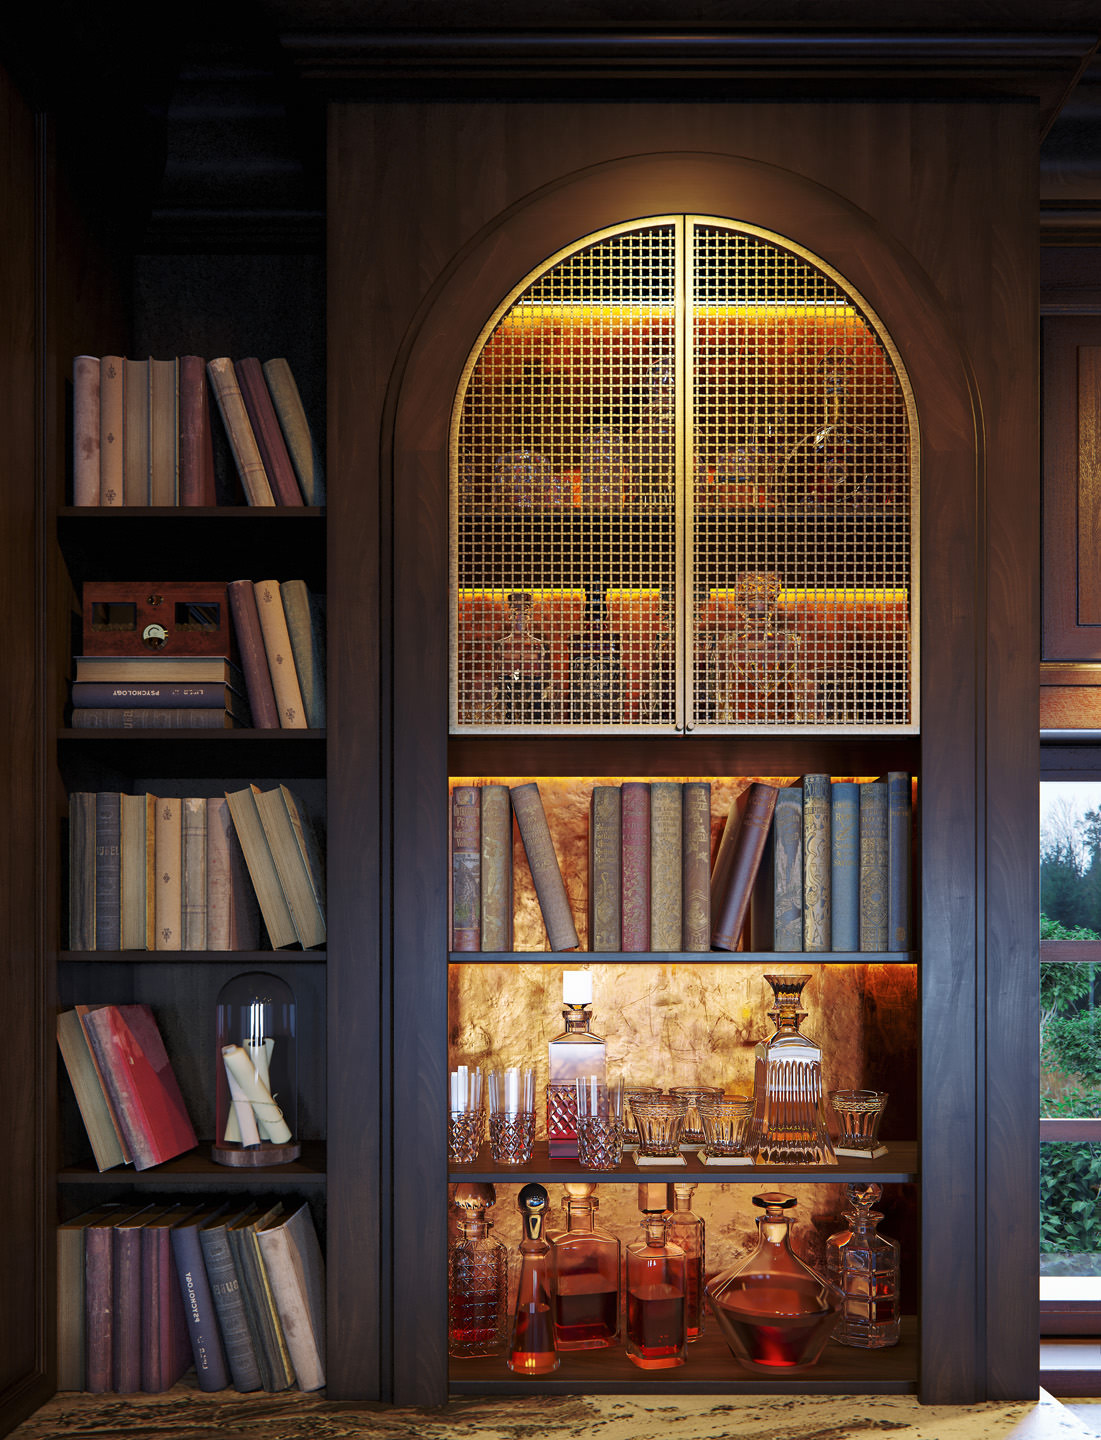 3D vignette of a library with wooden shelves and an arched opening with accent lights pointed at whiskey bottles inside